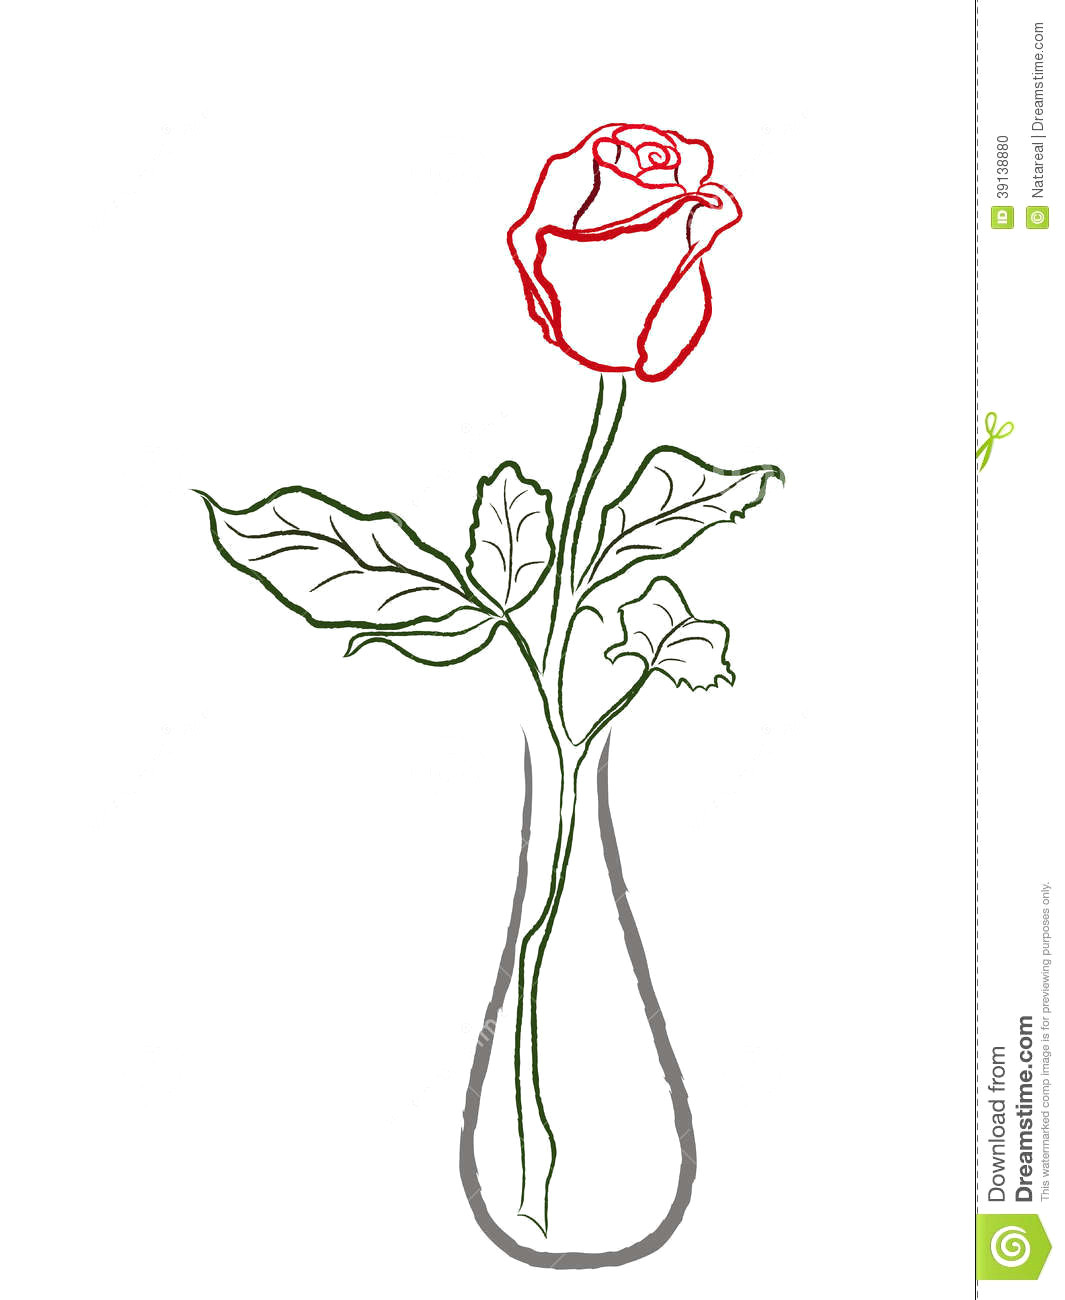 Drawing Of Red Flower Roses Pictures to Draw New Drawn Vase Red Rose 3h Vases How to Draw